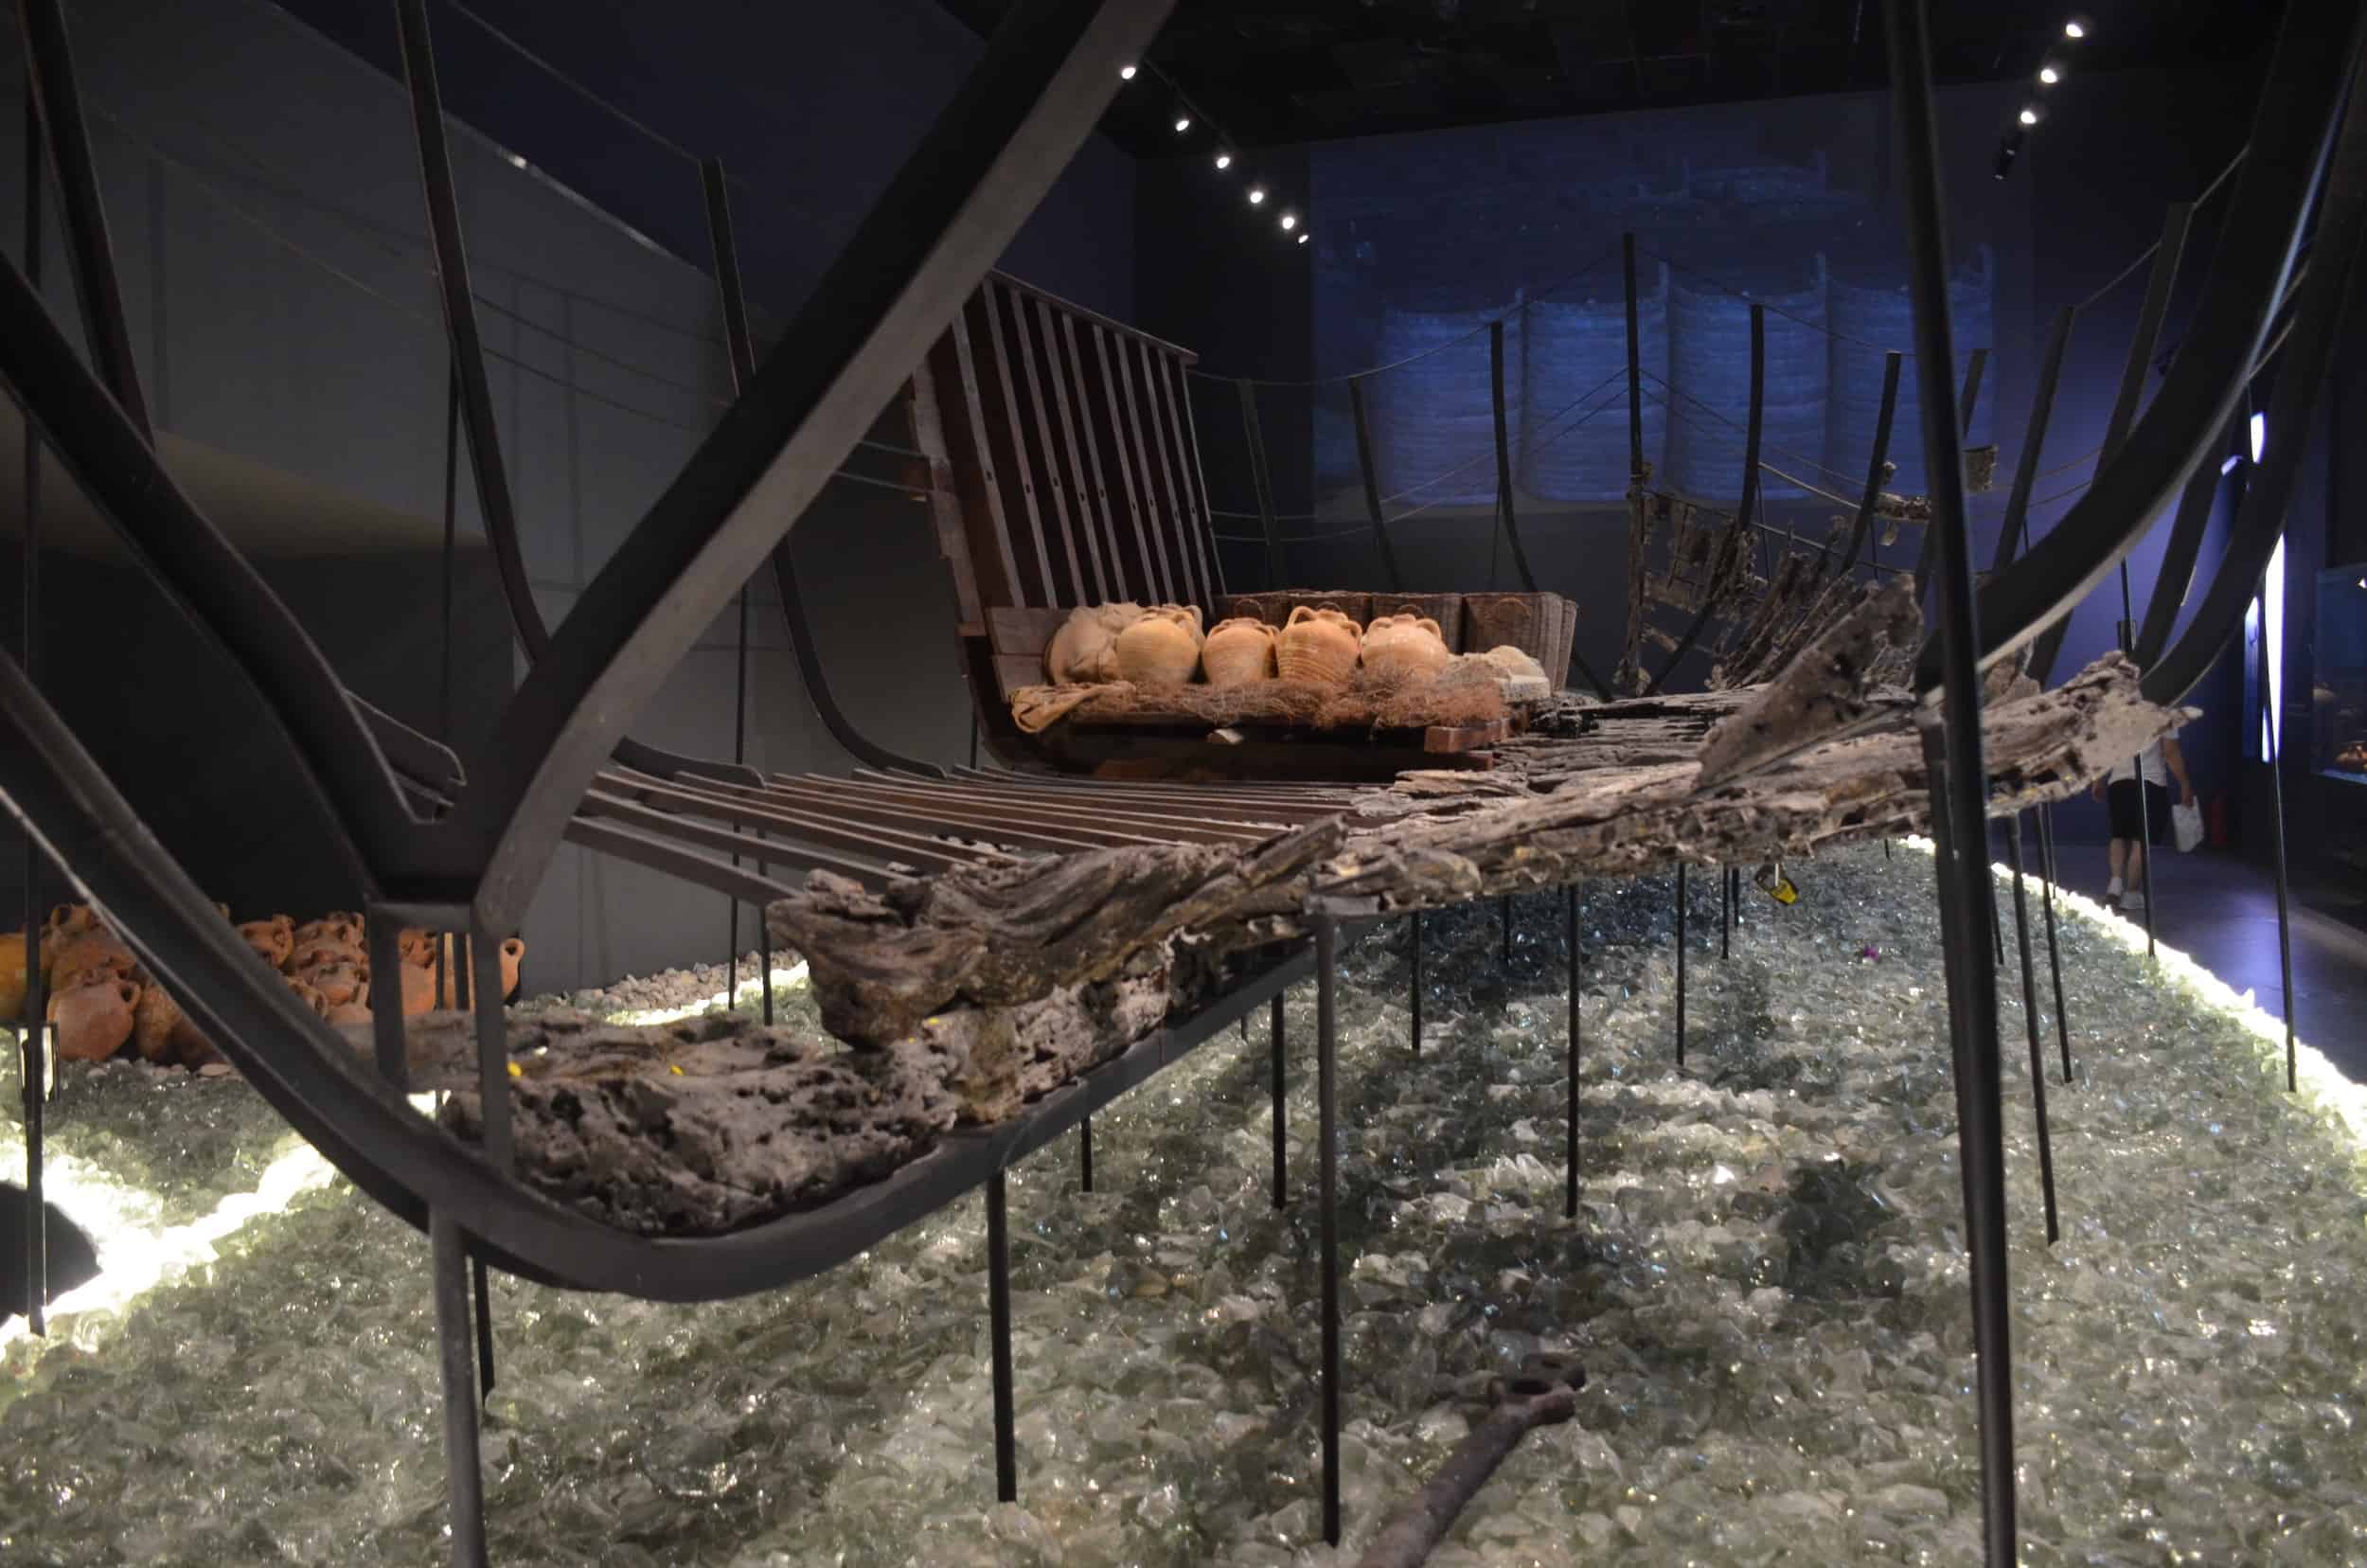 Remains of the ship at the Serçe Harbor Glass Wreck Exhibition